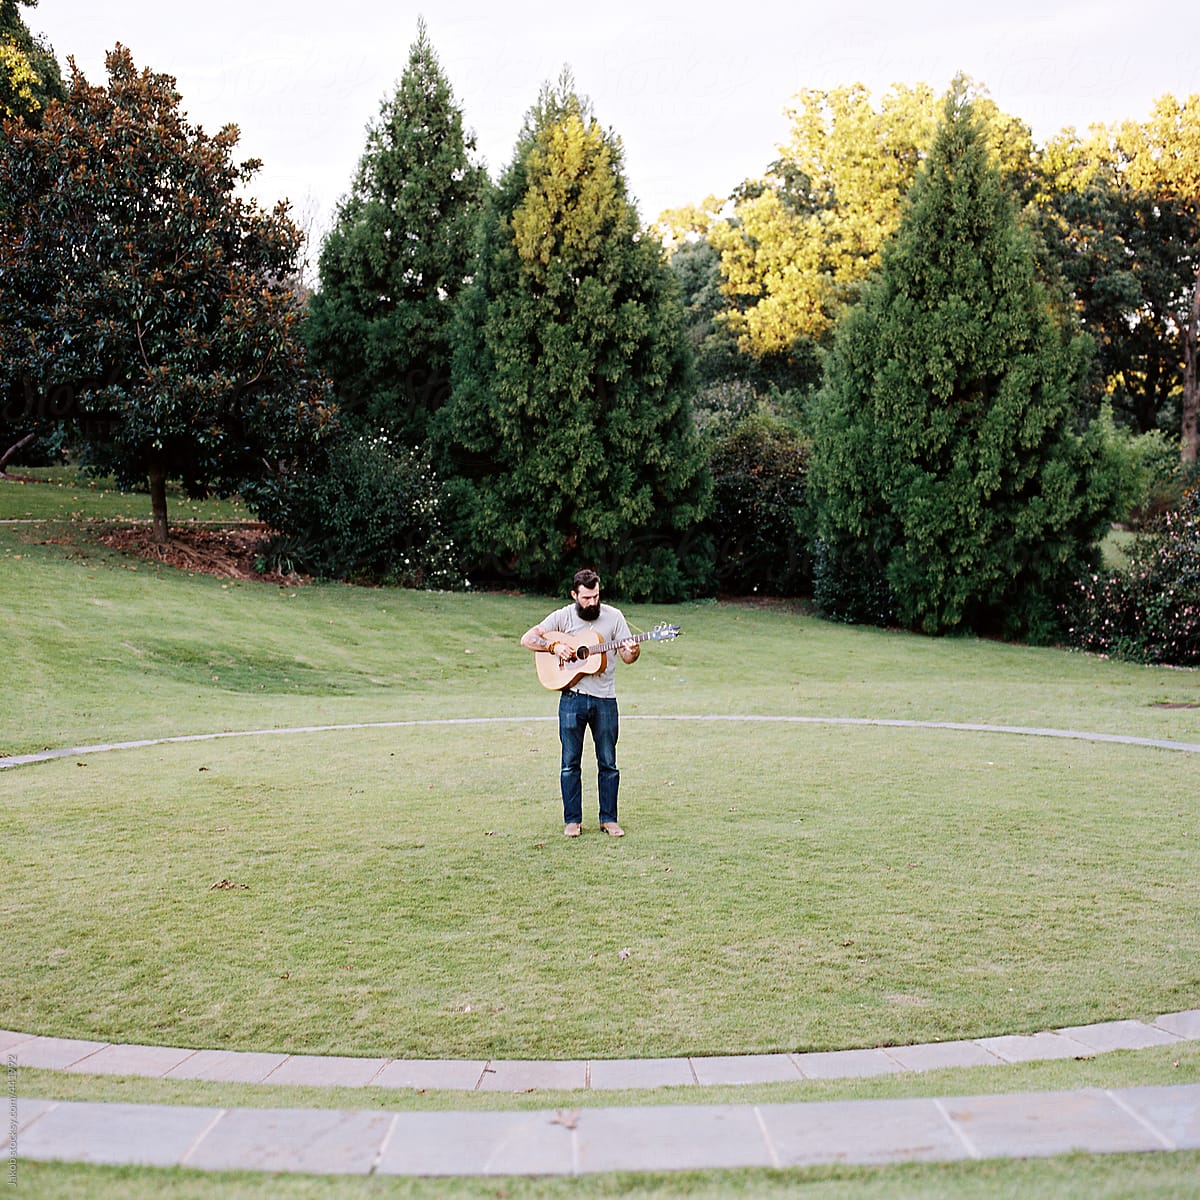 Bearded man with a guitar standing in a park